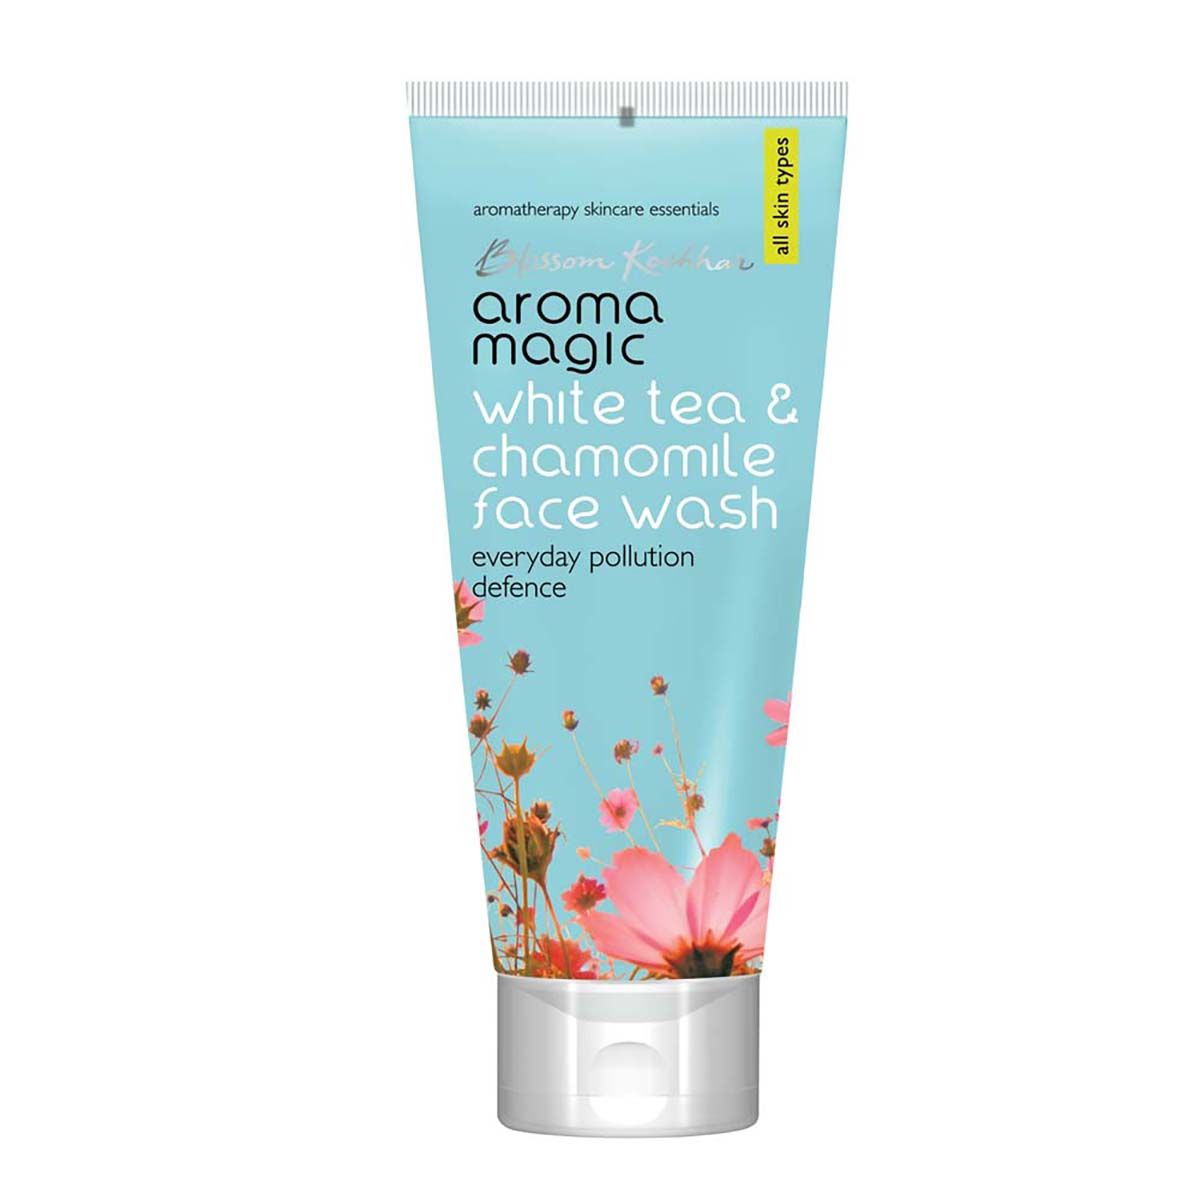 Aroma Magic White Tea & Chamomile Face Wash Everyday Pollution Defence (All Skin Types)